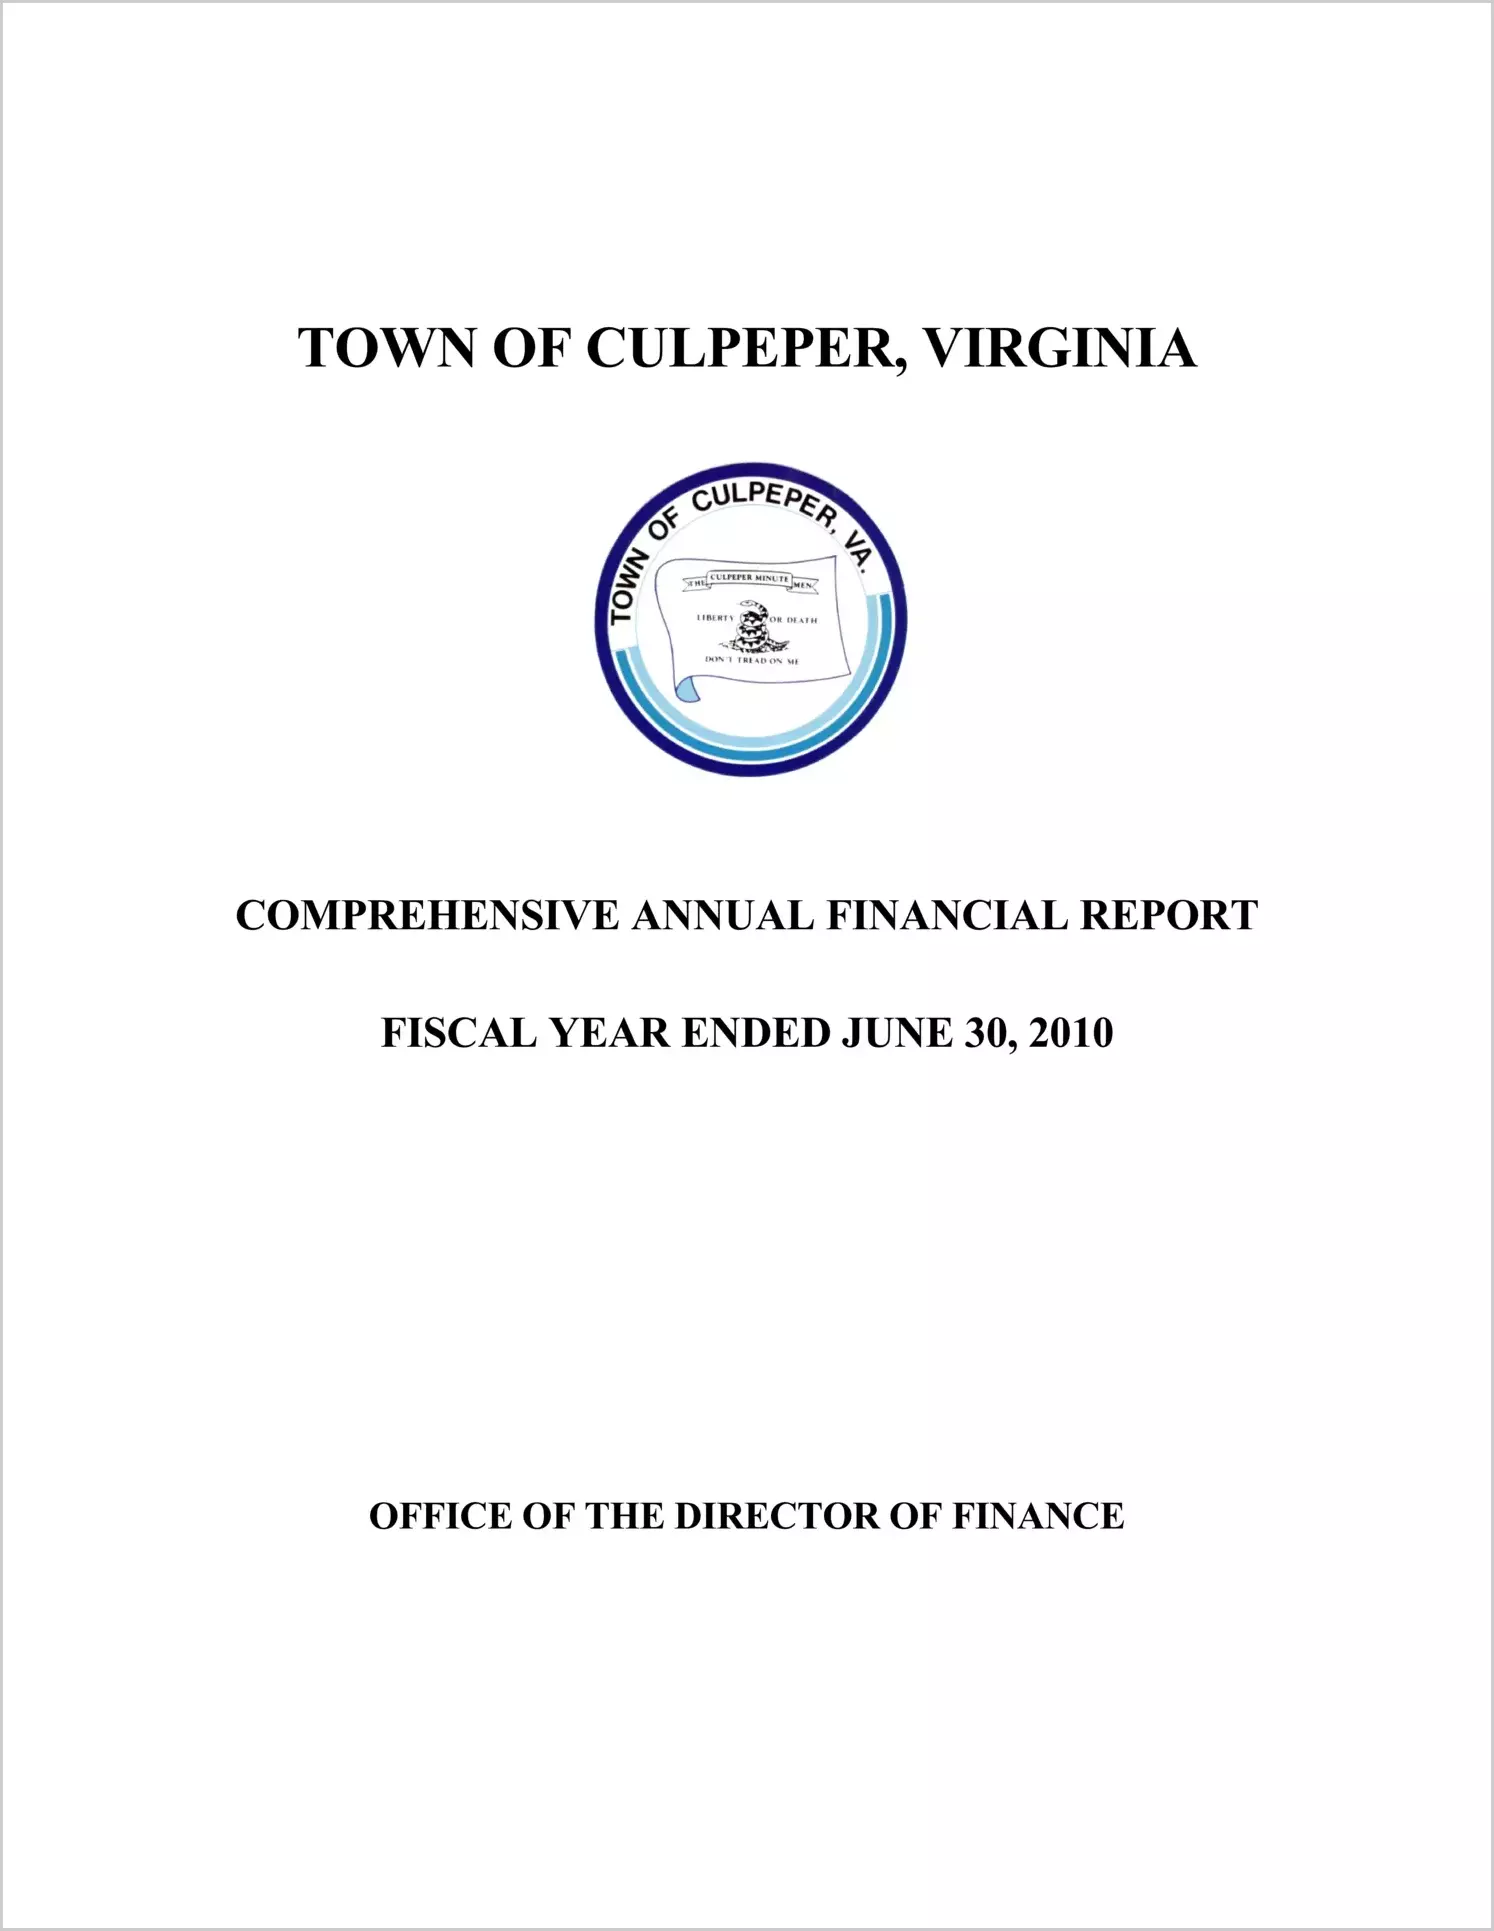 2010 Annual Financial Report for Town of Culpeper